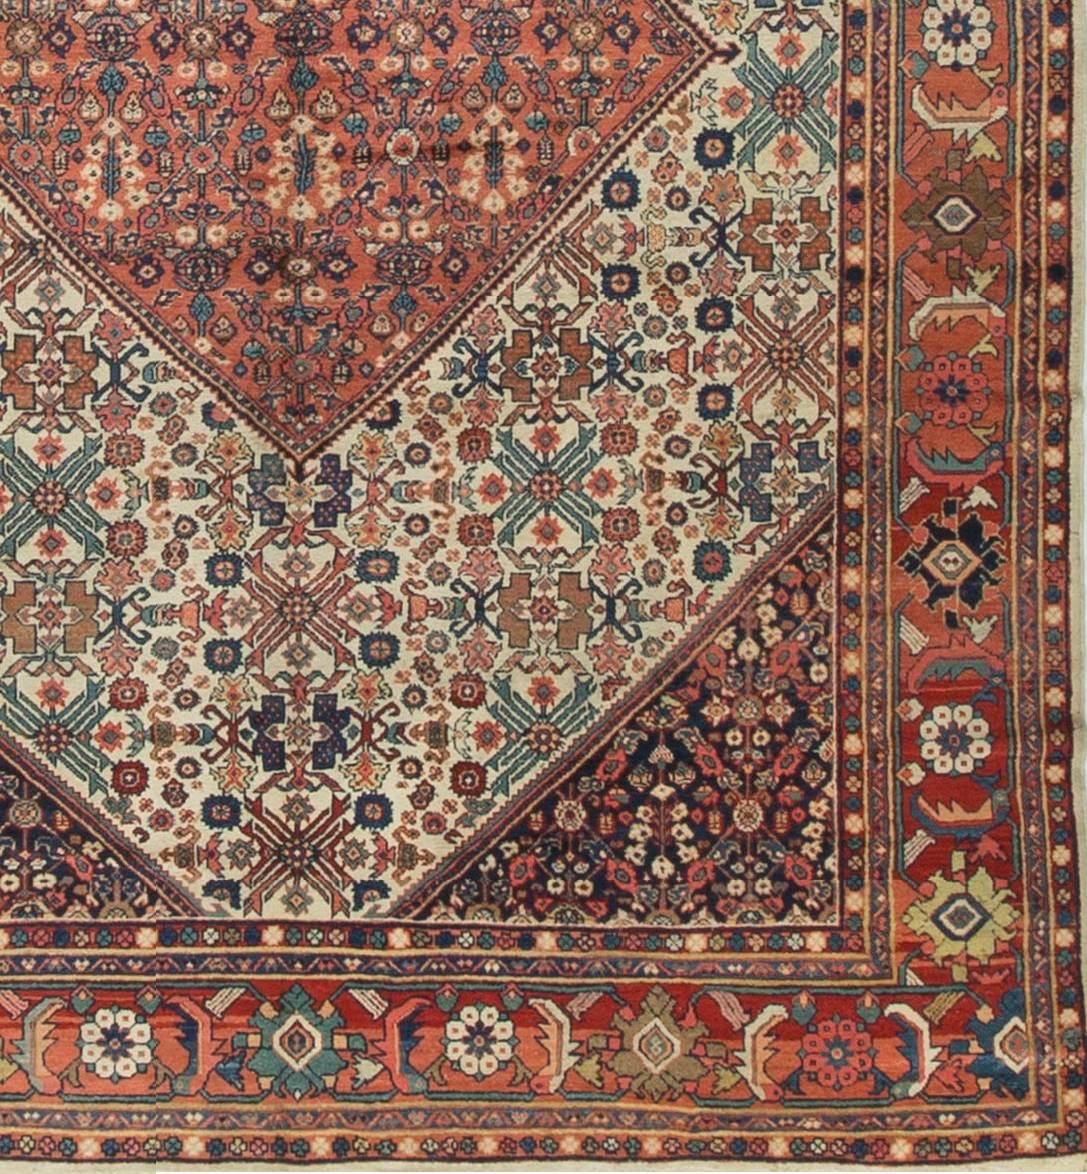 Hand-Woven Persian Sultanabad Rug Carpet, circa 1890 9'1 x 12'1. For Sale